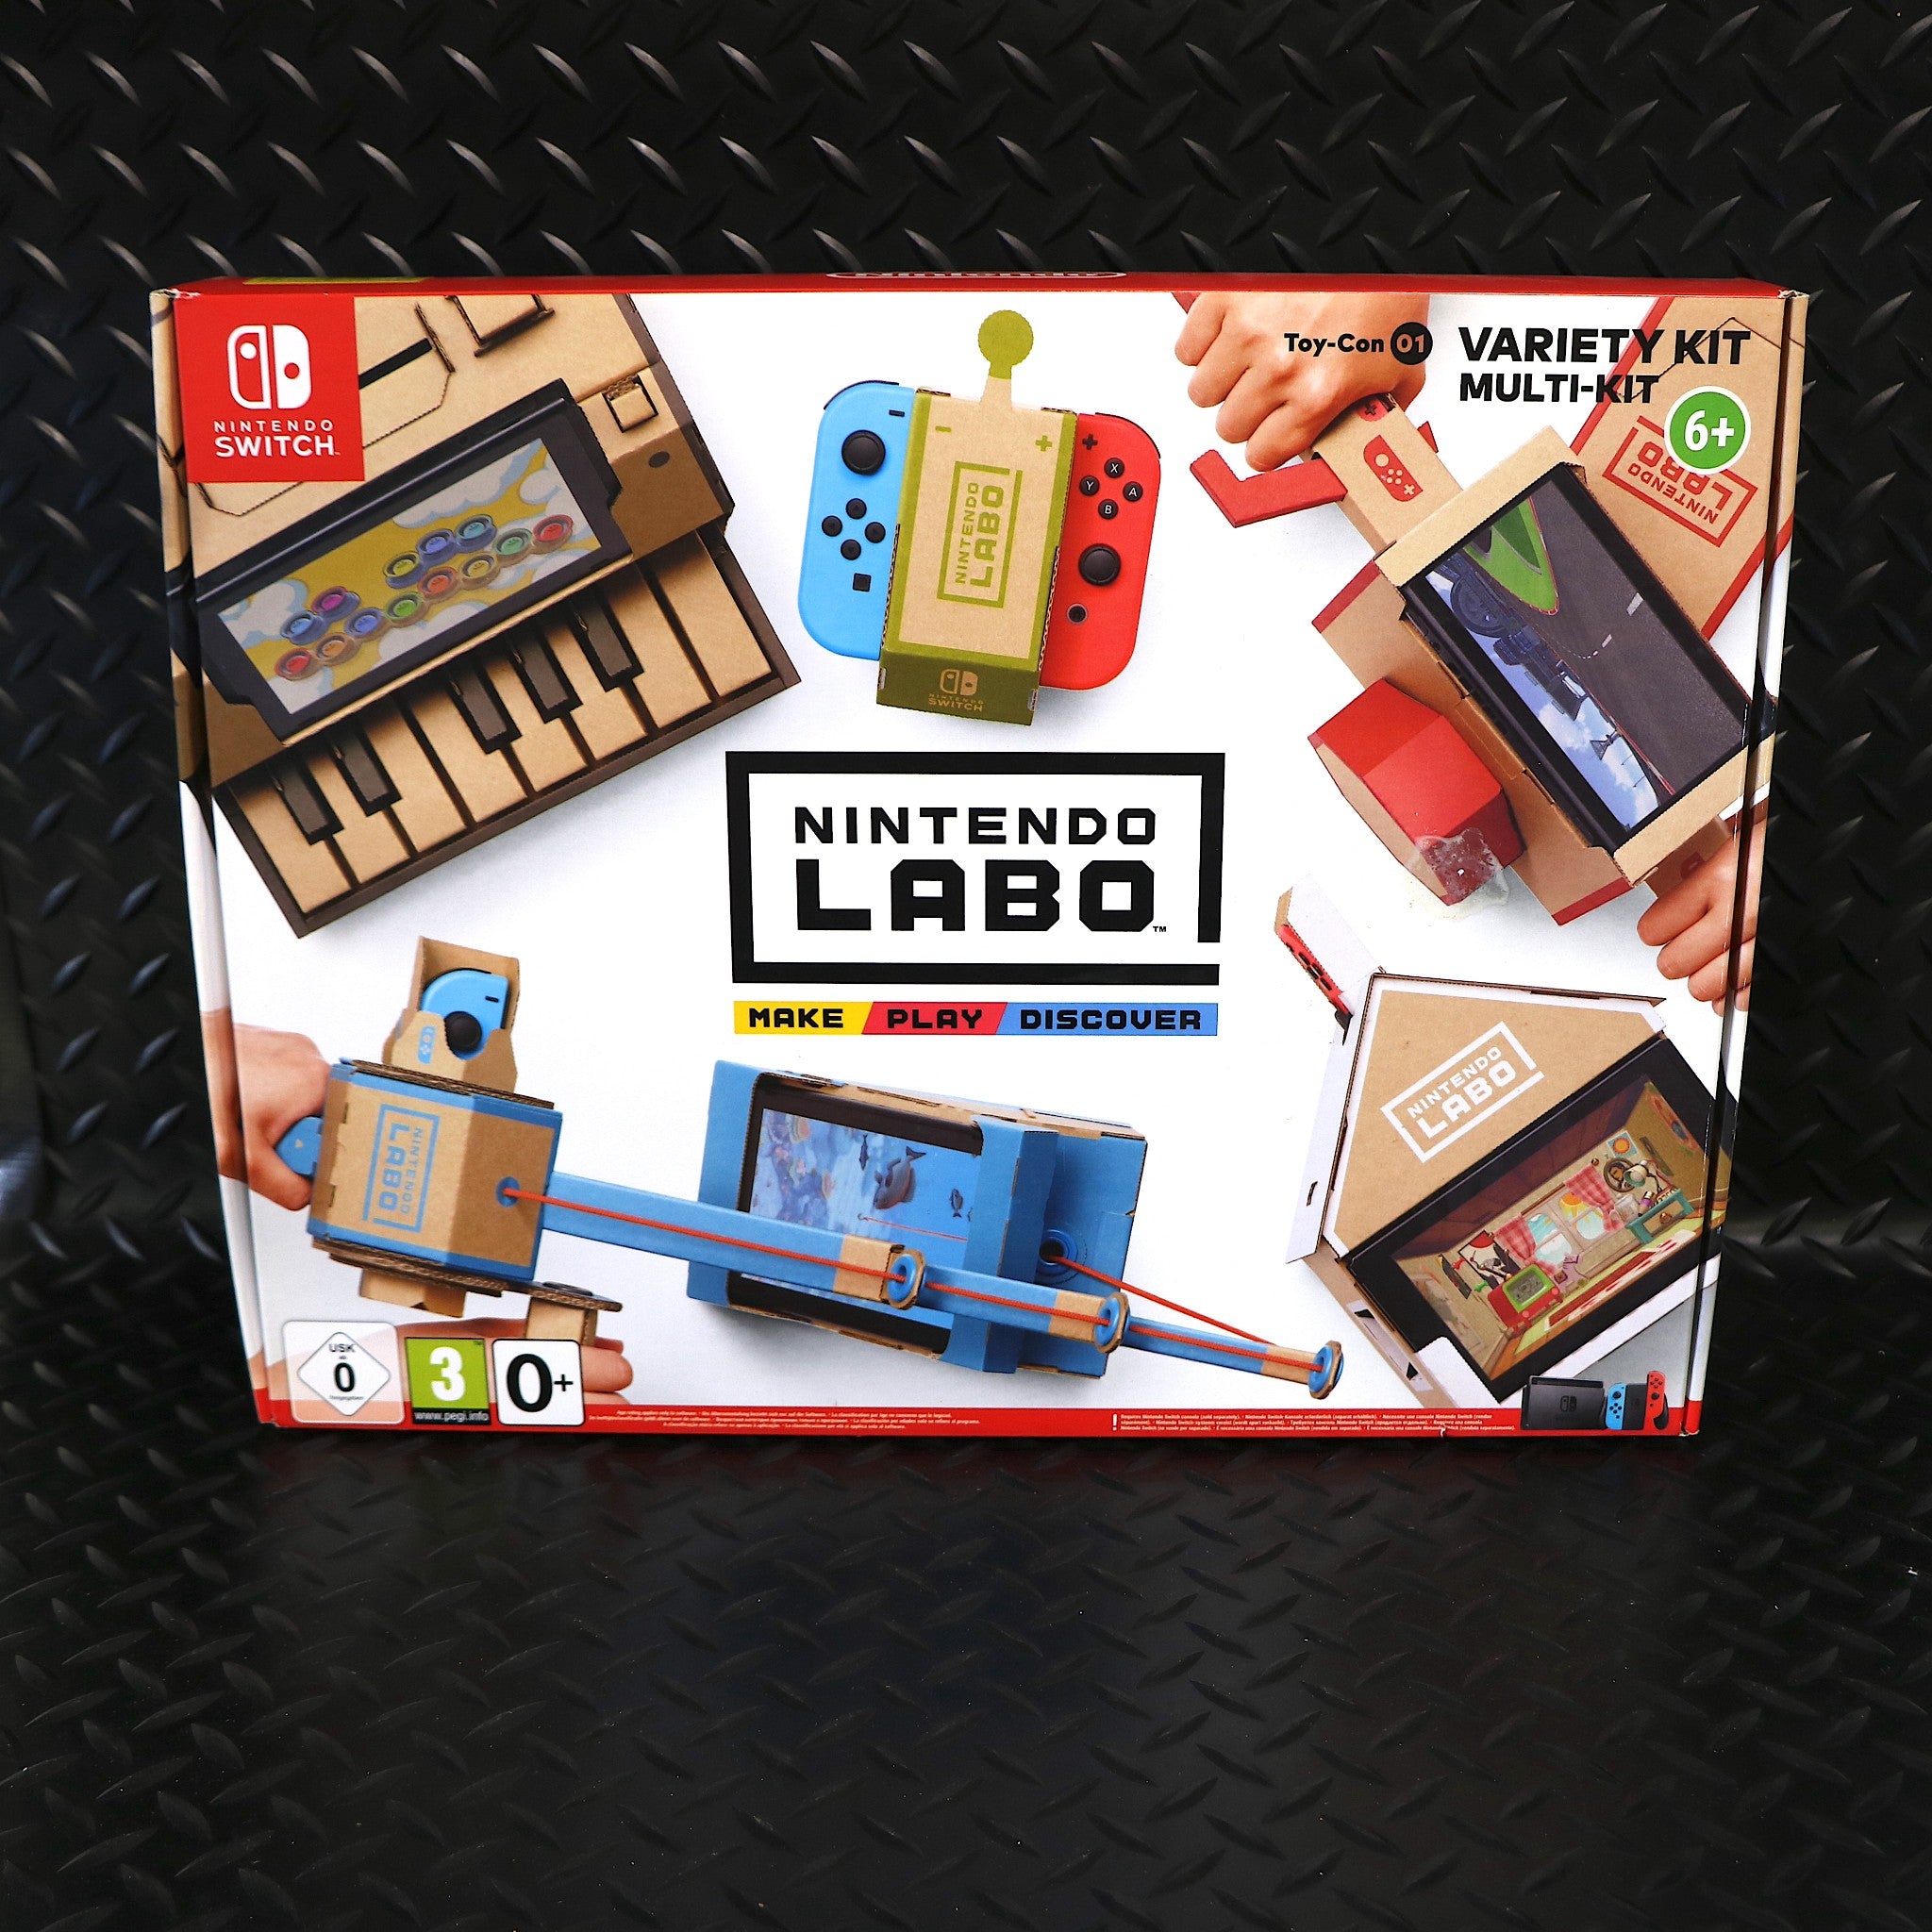 Nintendo Labo Variety Multi Kit For Switch Console Games | Make Play Discover